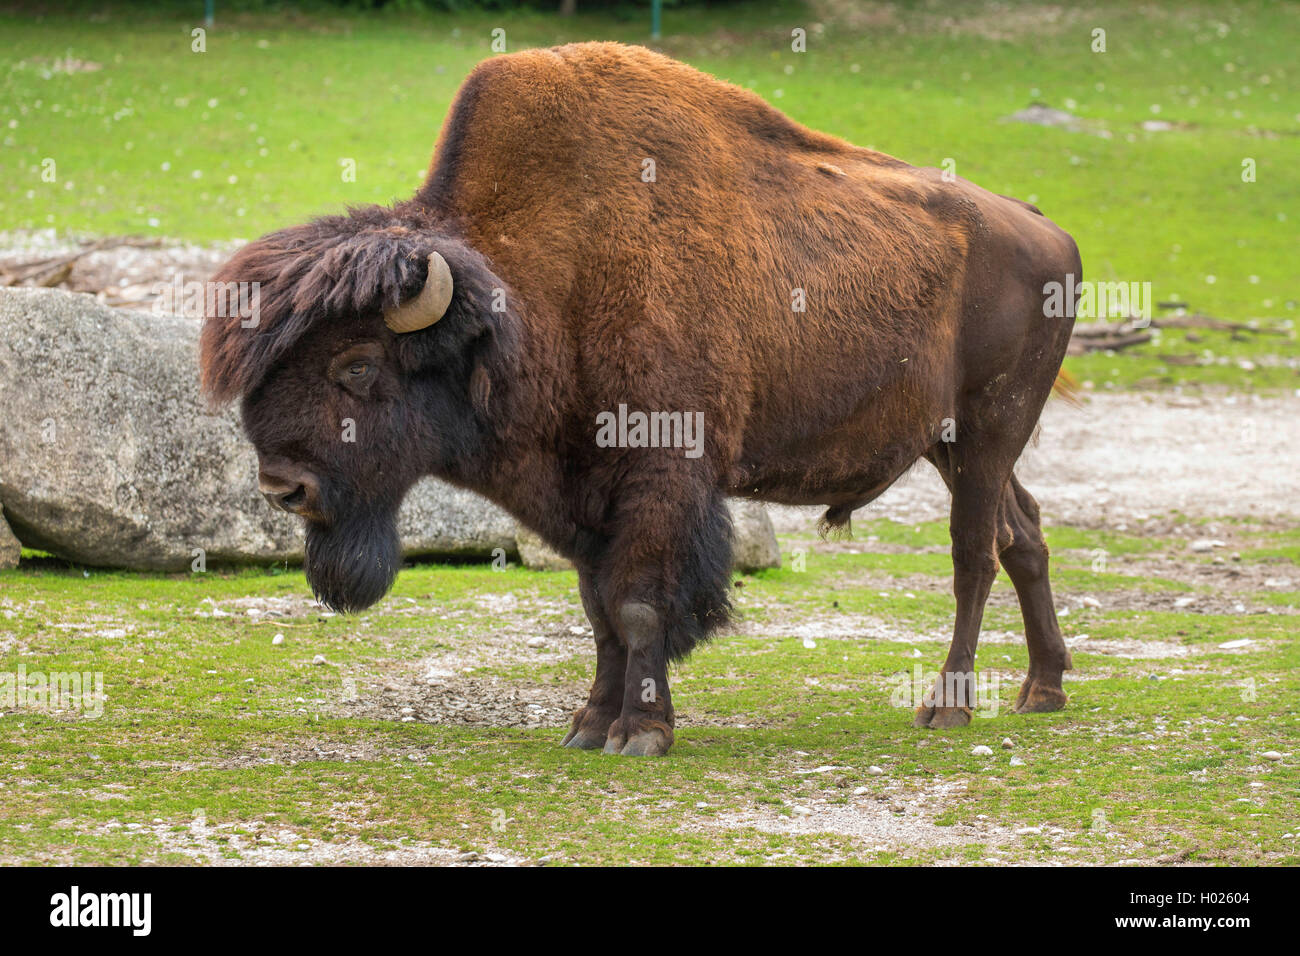 American bison, wood bison, buffalo (Bison bison athabascae), bull in the zoo Stock Photo